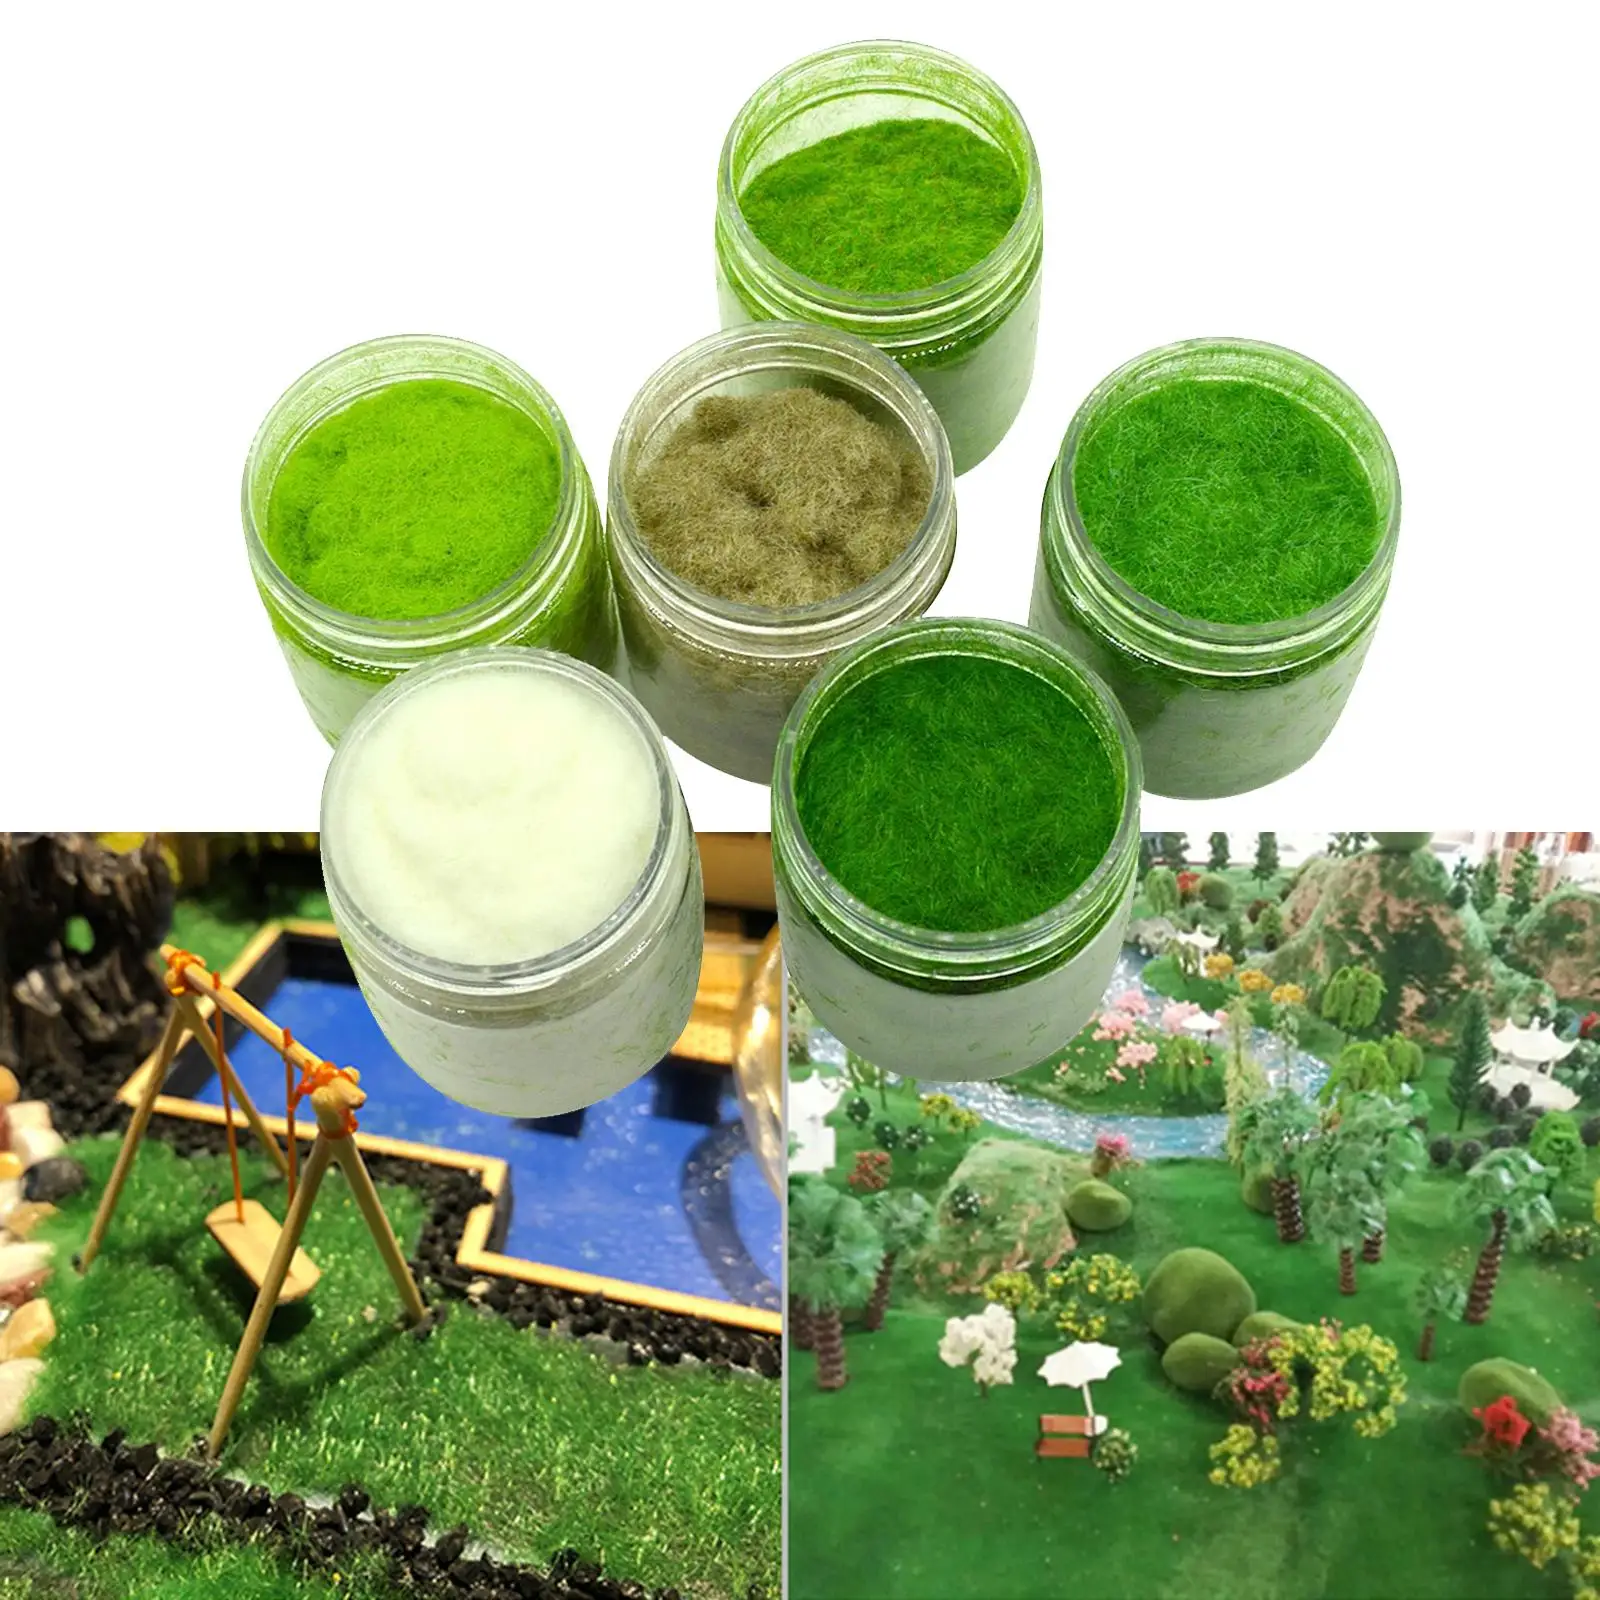 Static Grass Simulation Model Grass Grass Tufts for Artificial Sand Table Scenery